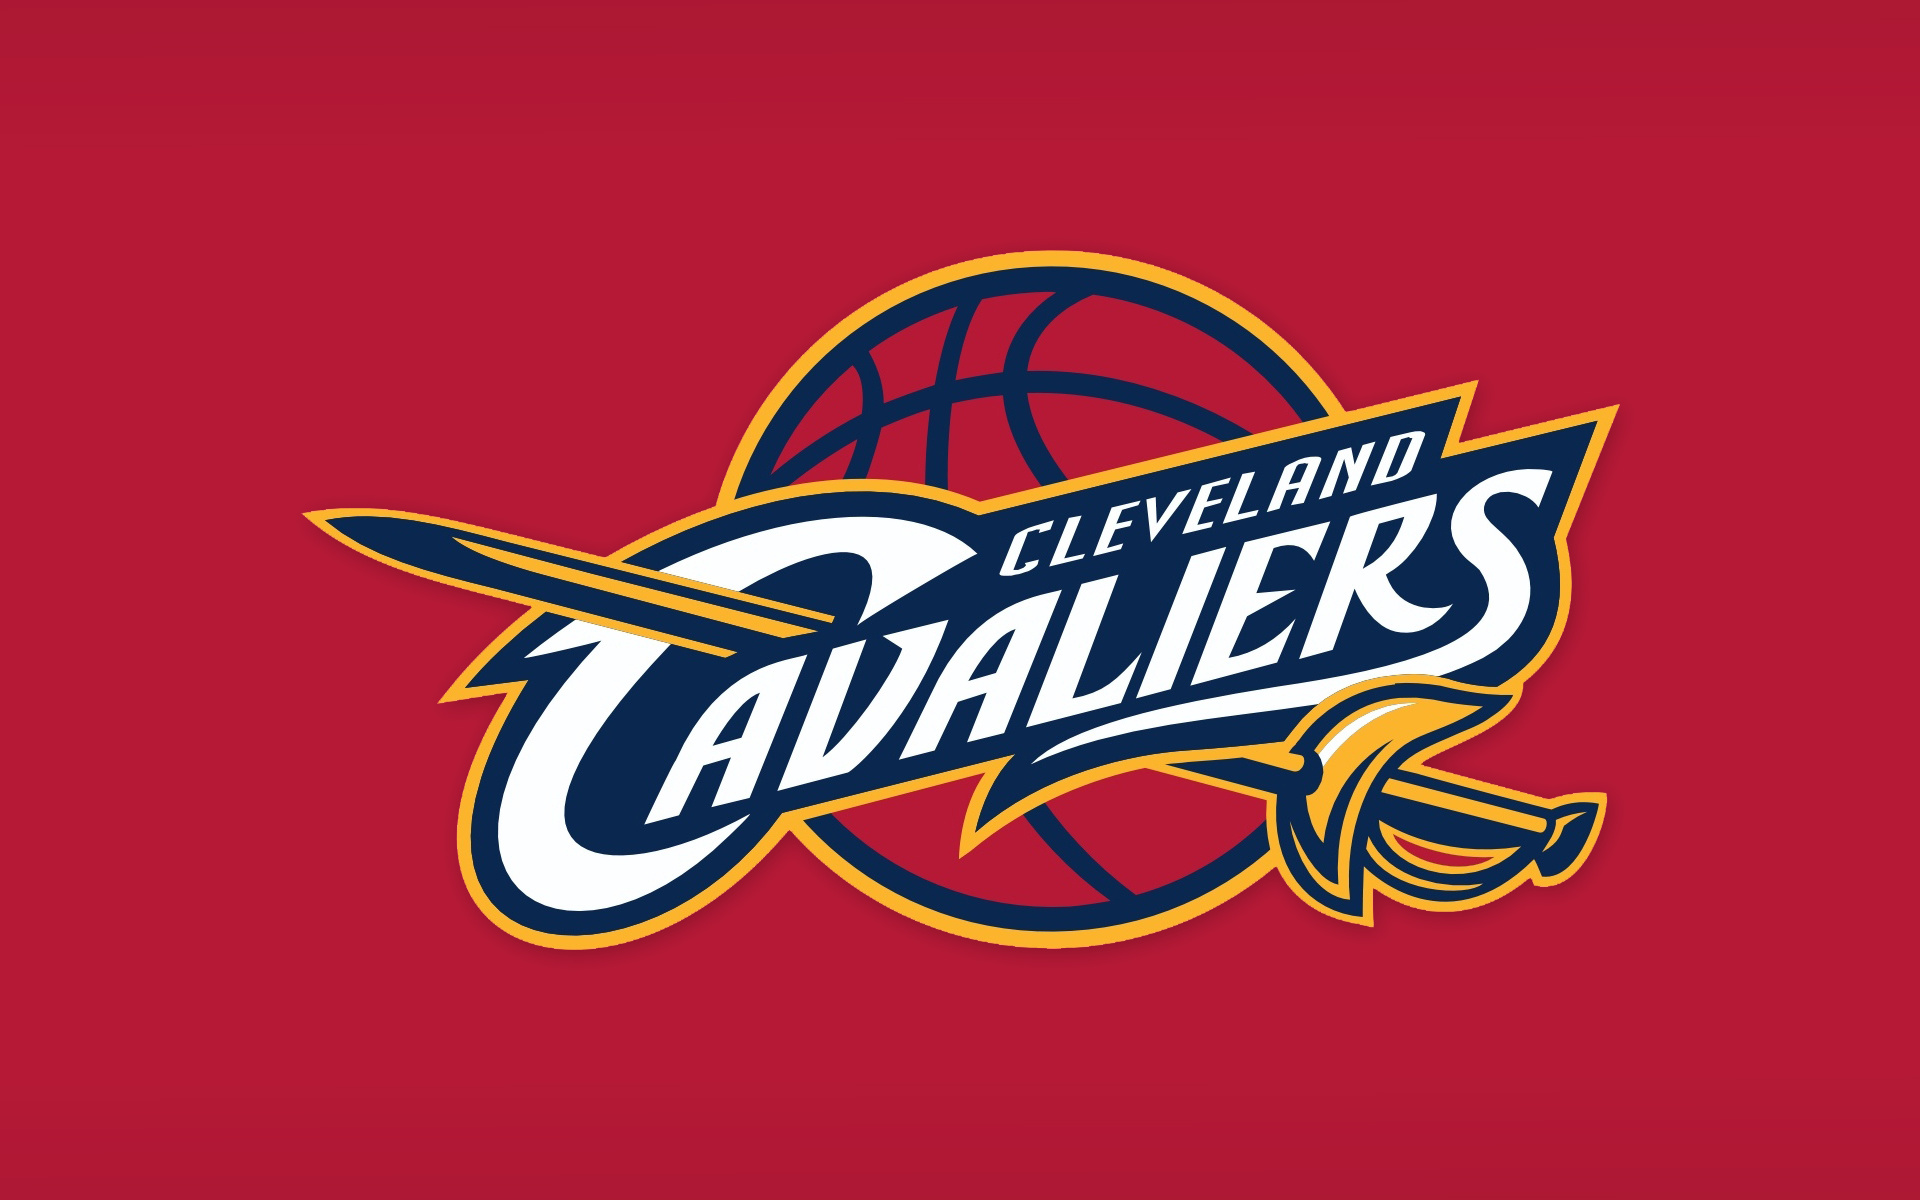 Cleveland Cavaliers: The team made their first appearance in the NBA Finals in 2007. 1920x1200 HD Background.